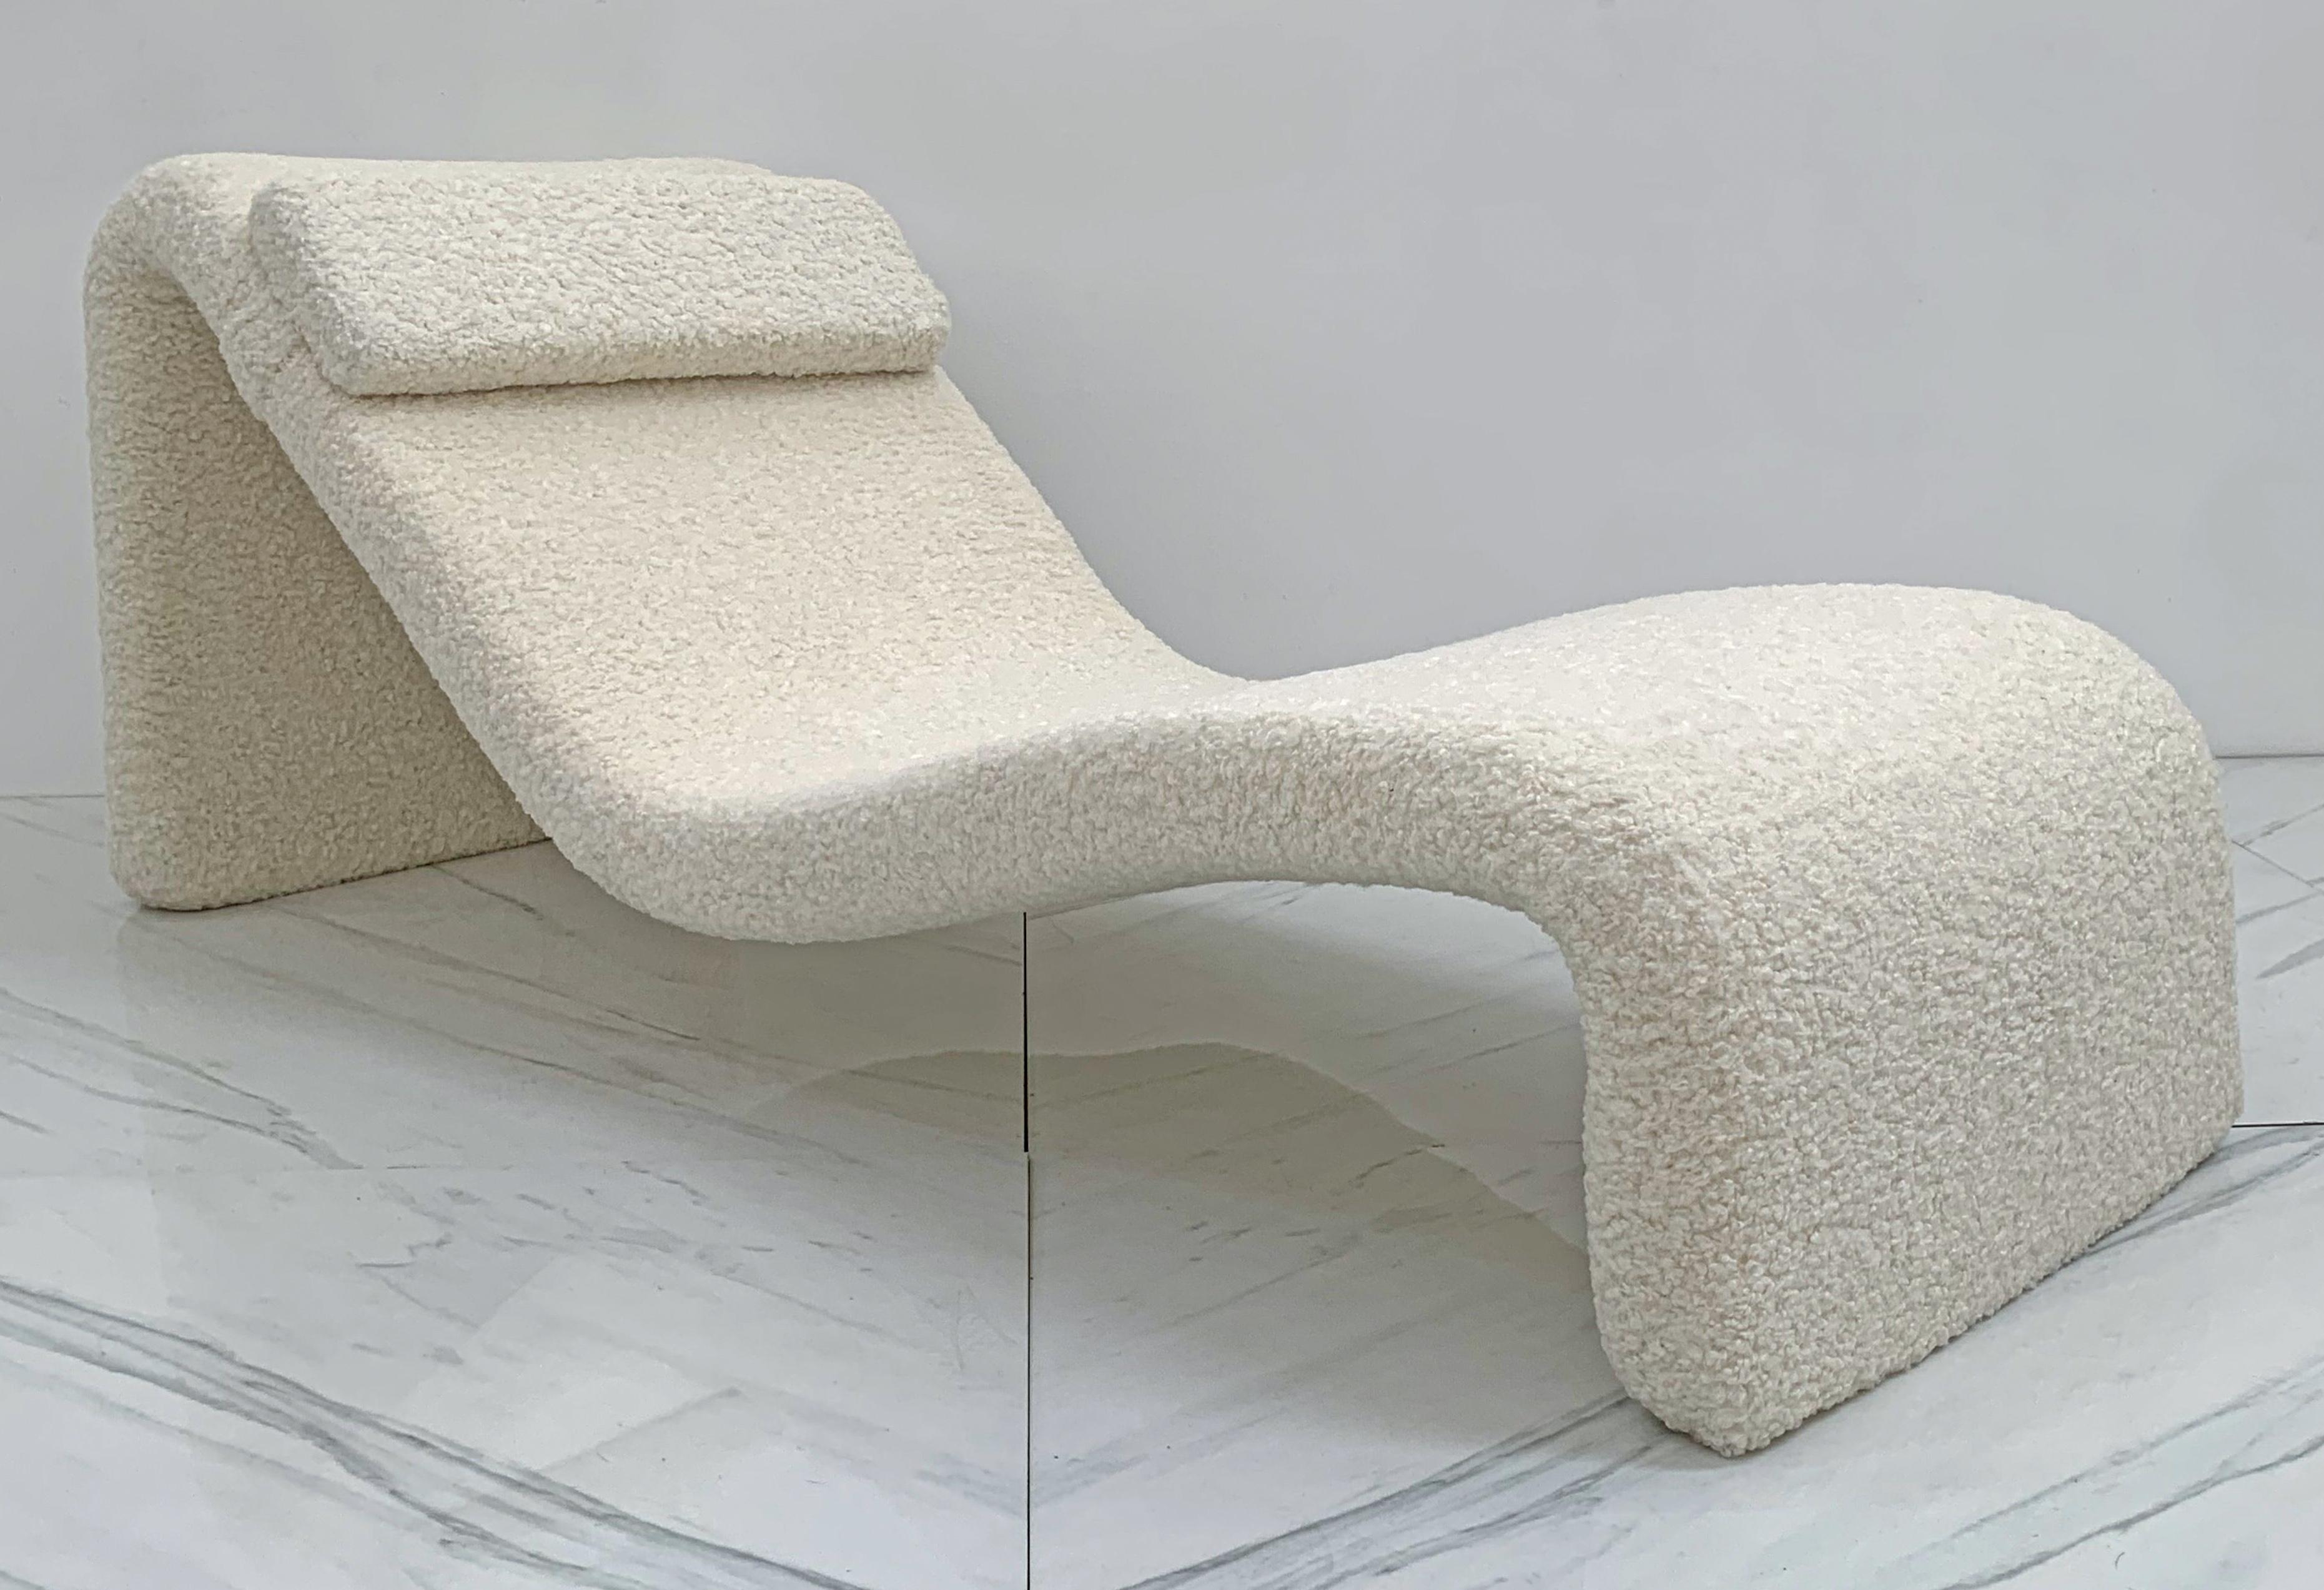 This chaise lounge 'Djinn' by Olivier Mourgue for Airborne international, France 1964-65 is beyond stunning. Mourgue, a highly regarded designer holds a very important place in the world of modern French design. This chaise is well known for it's